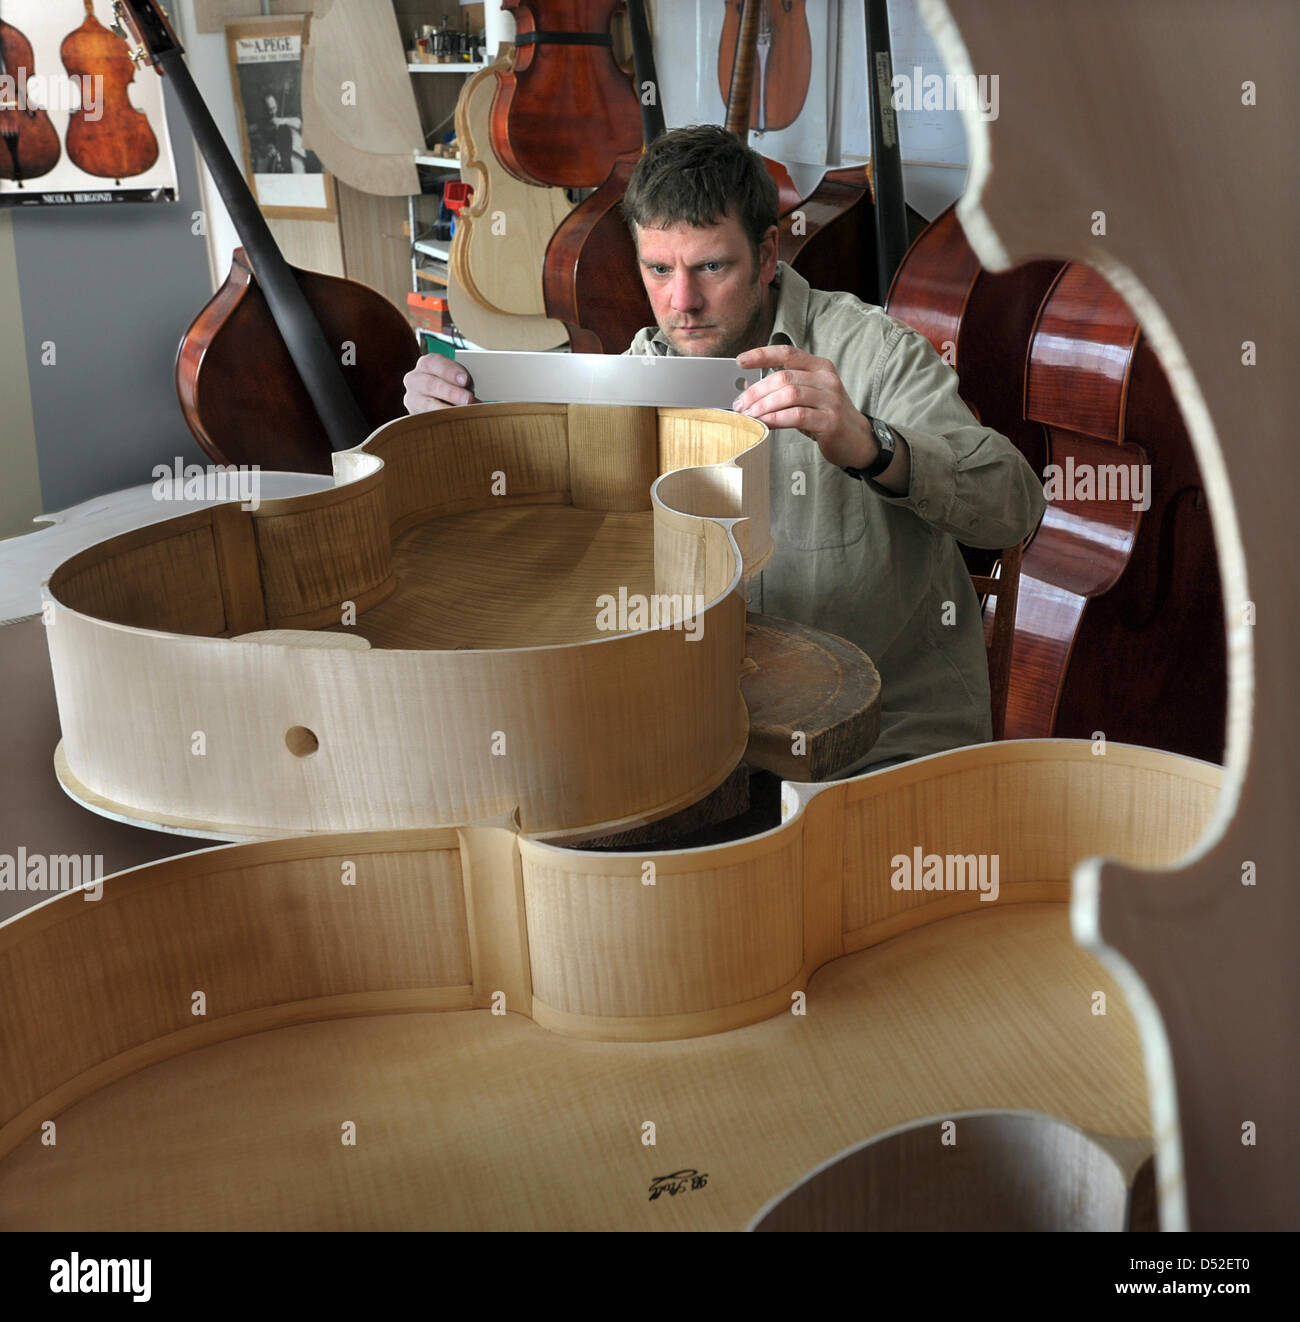 Instrument master builder Bjoern Stoll manufactures premium double-basses and cellos in his workshop in Markneukirchen, Germany, 16 February 2010. The Vogtland region has been for more than 350 years a worldwide unique area with high-class instrument master builders in and around Markneukirchen and Klingenthal. Photo: Wolfgang Thieme Stock Photo